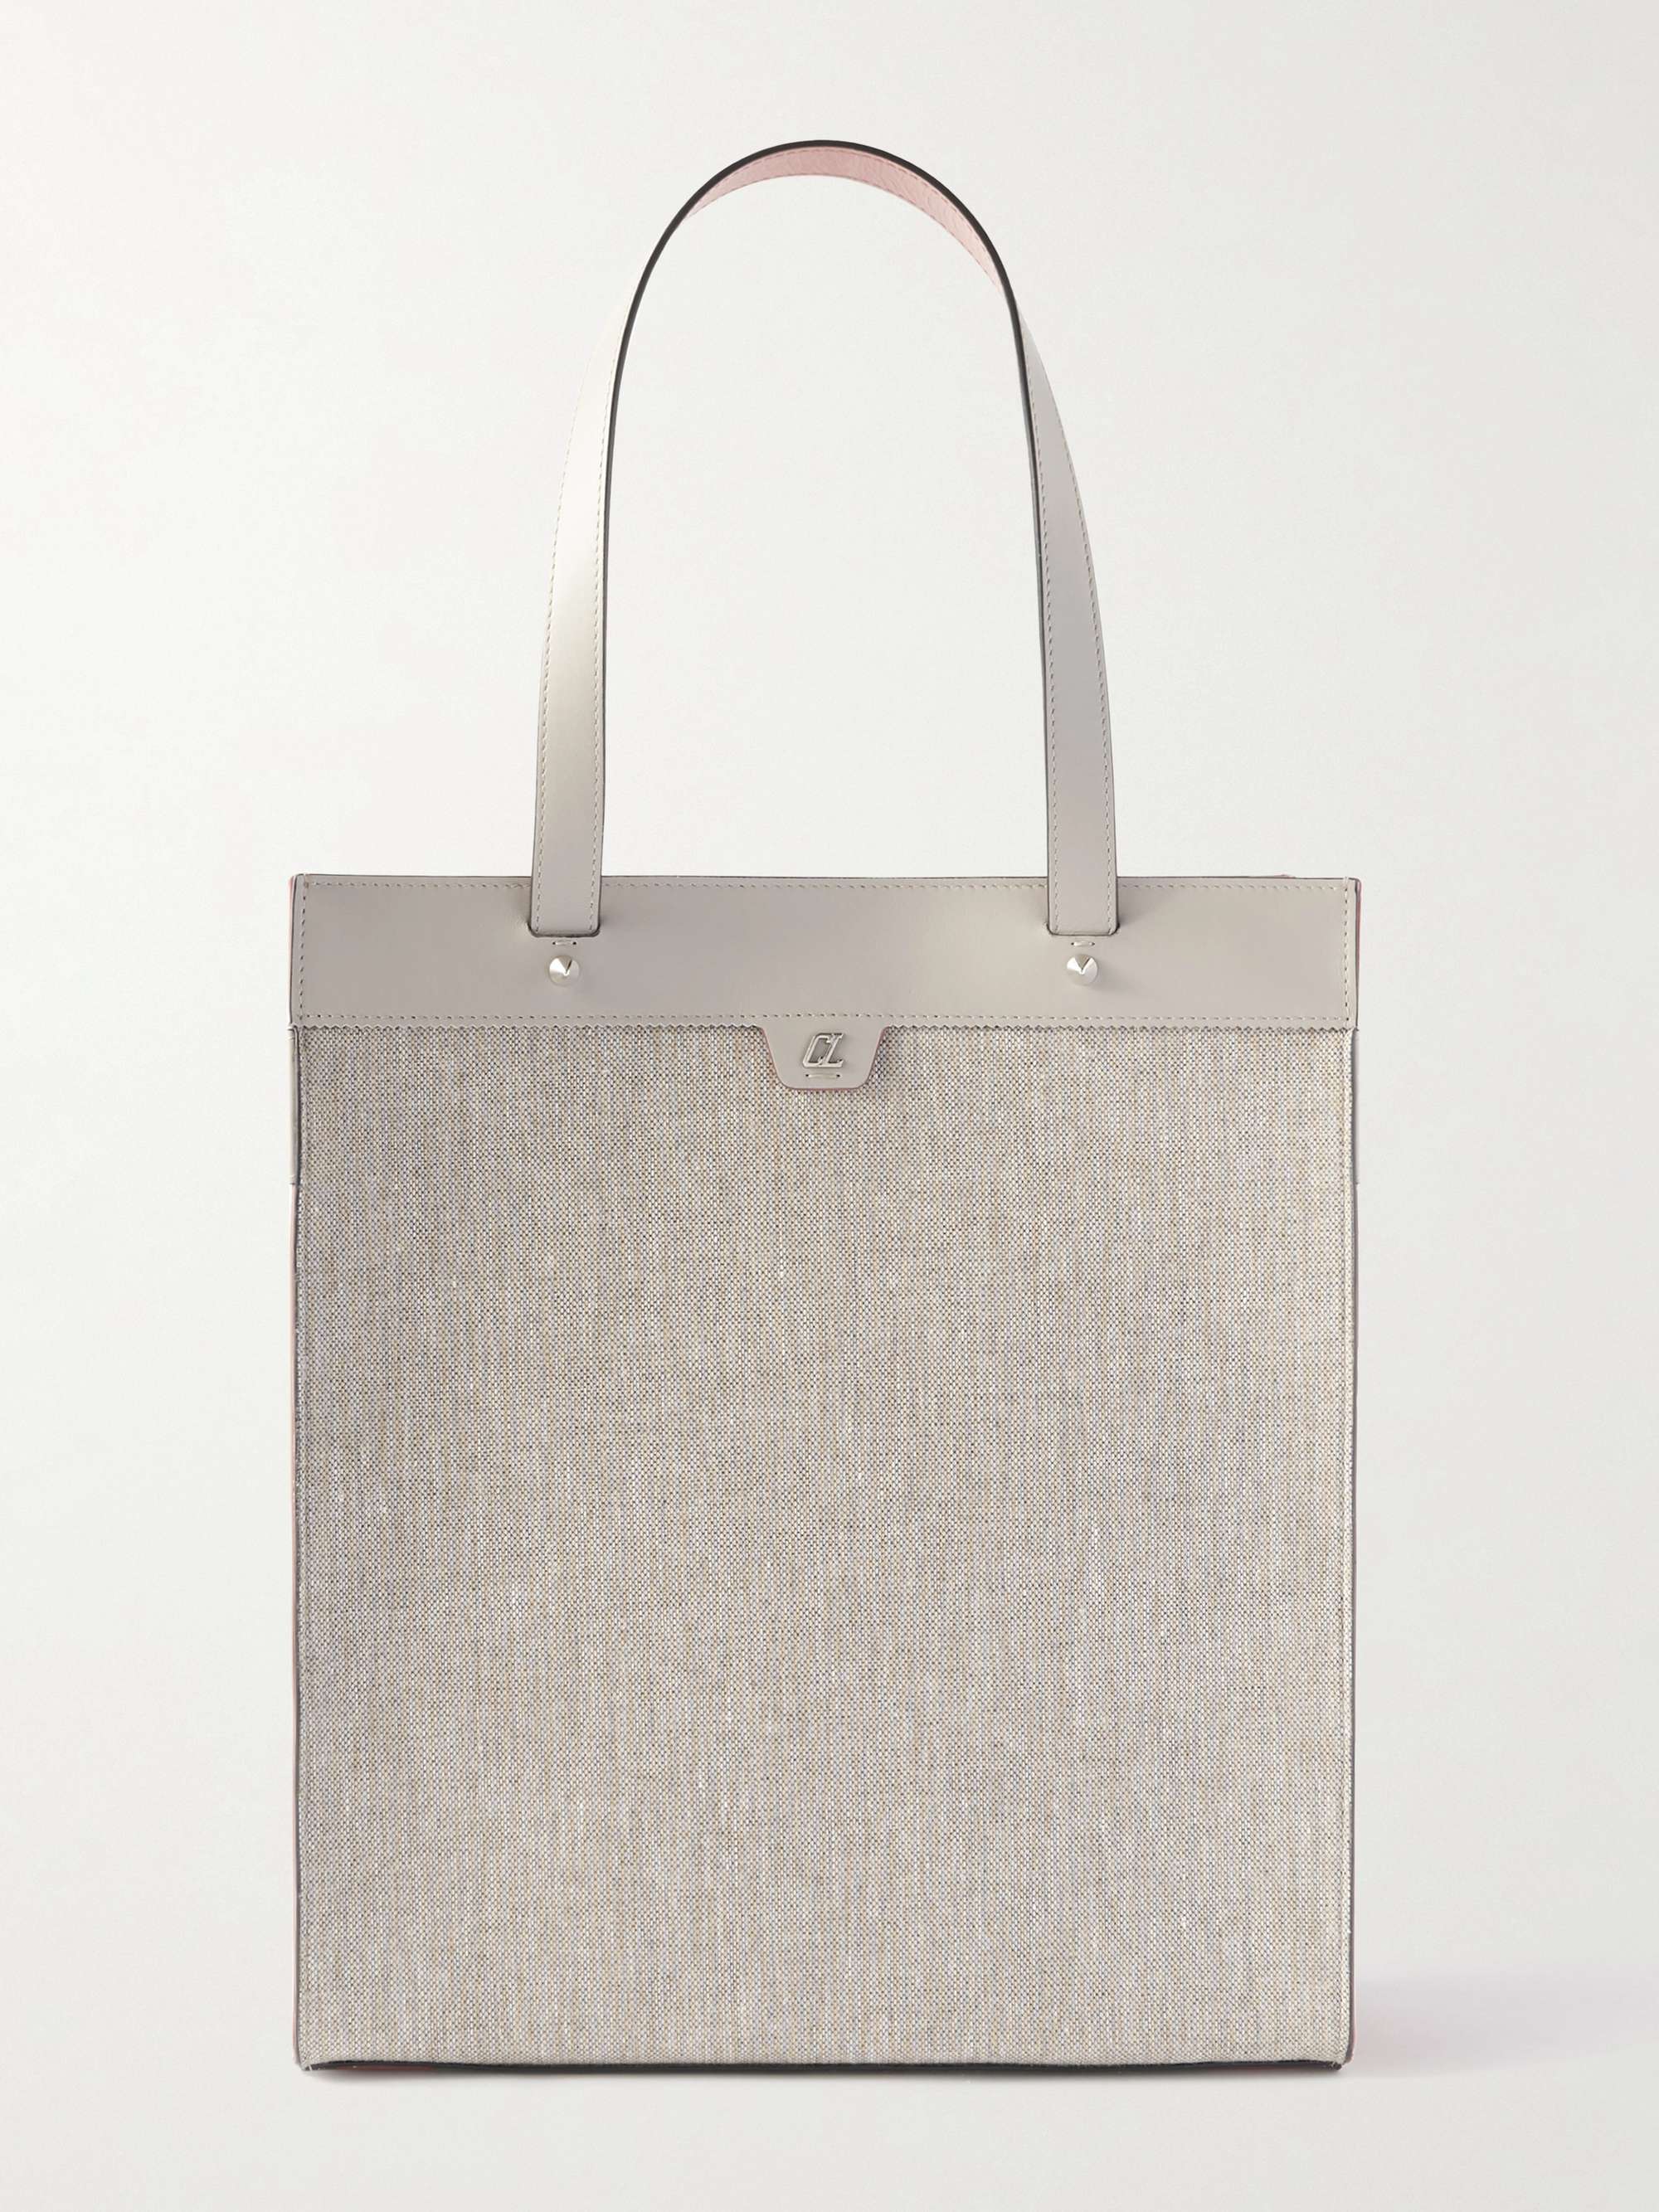 Oberst motto Ventilere CHRISTIAN LOUBOUTIN Logo-Embossed Canvas and Leather Tote Bag | MR PORTER